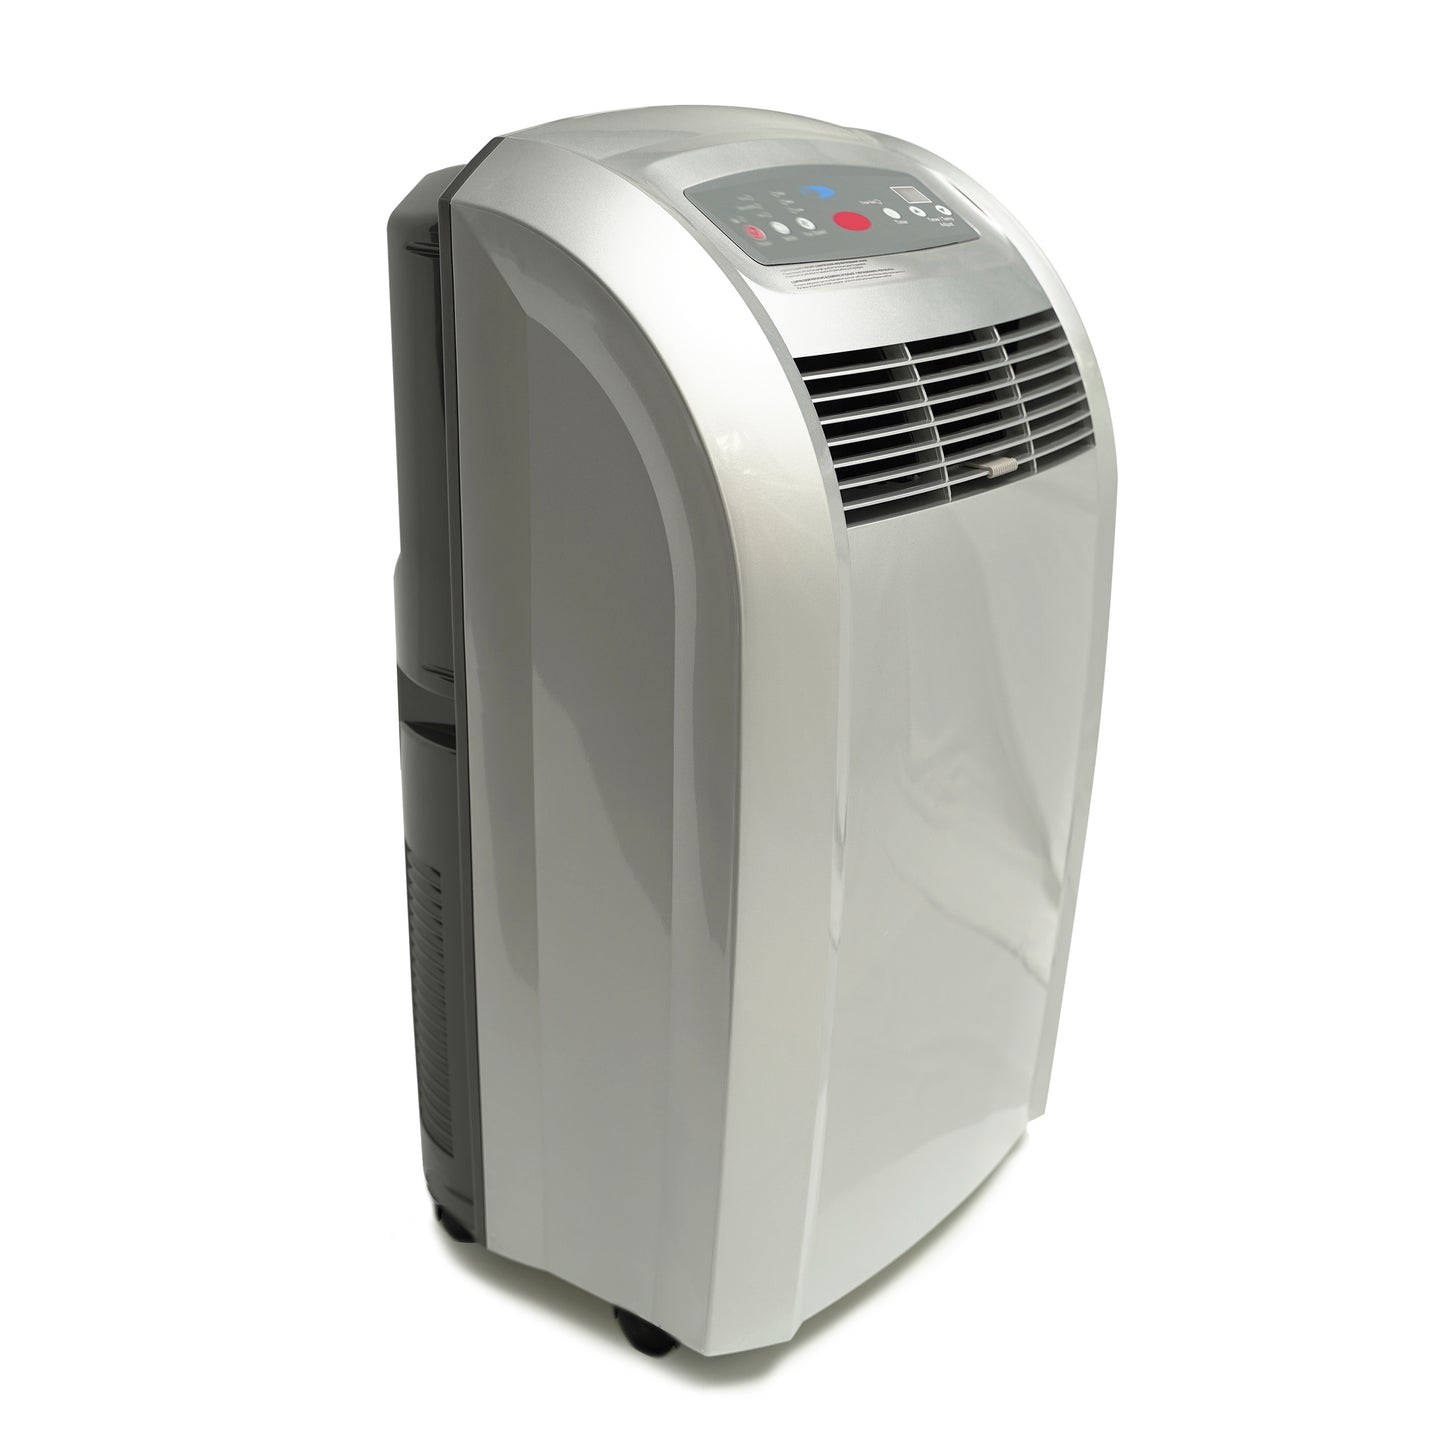 A silver portable air conditioner with activated carbon filter, perfect for cooling up to 400 sq ft.